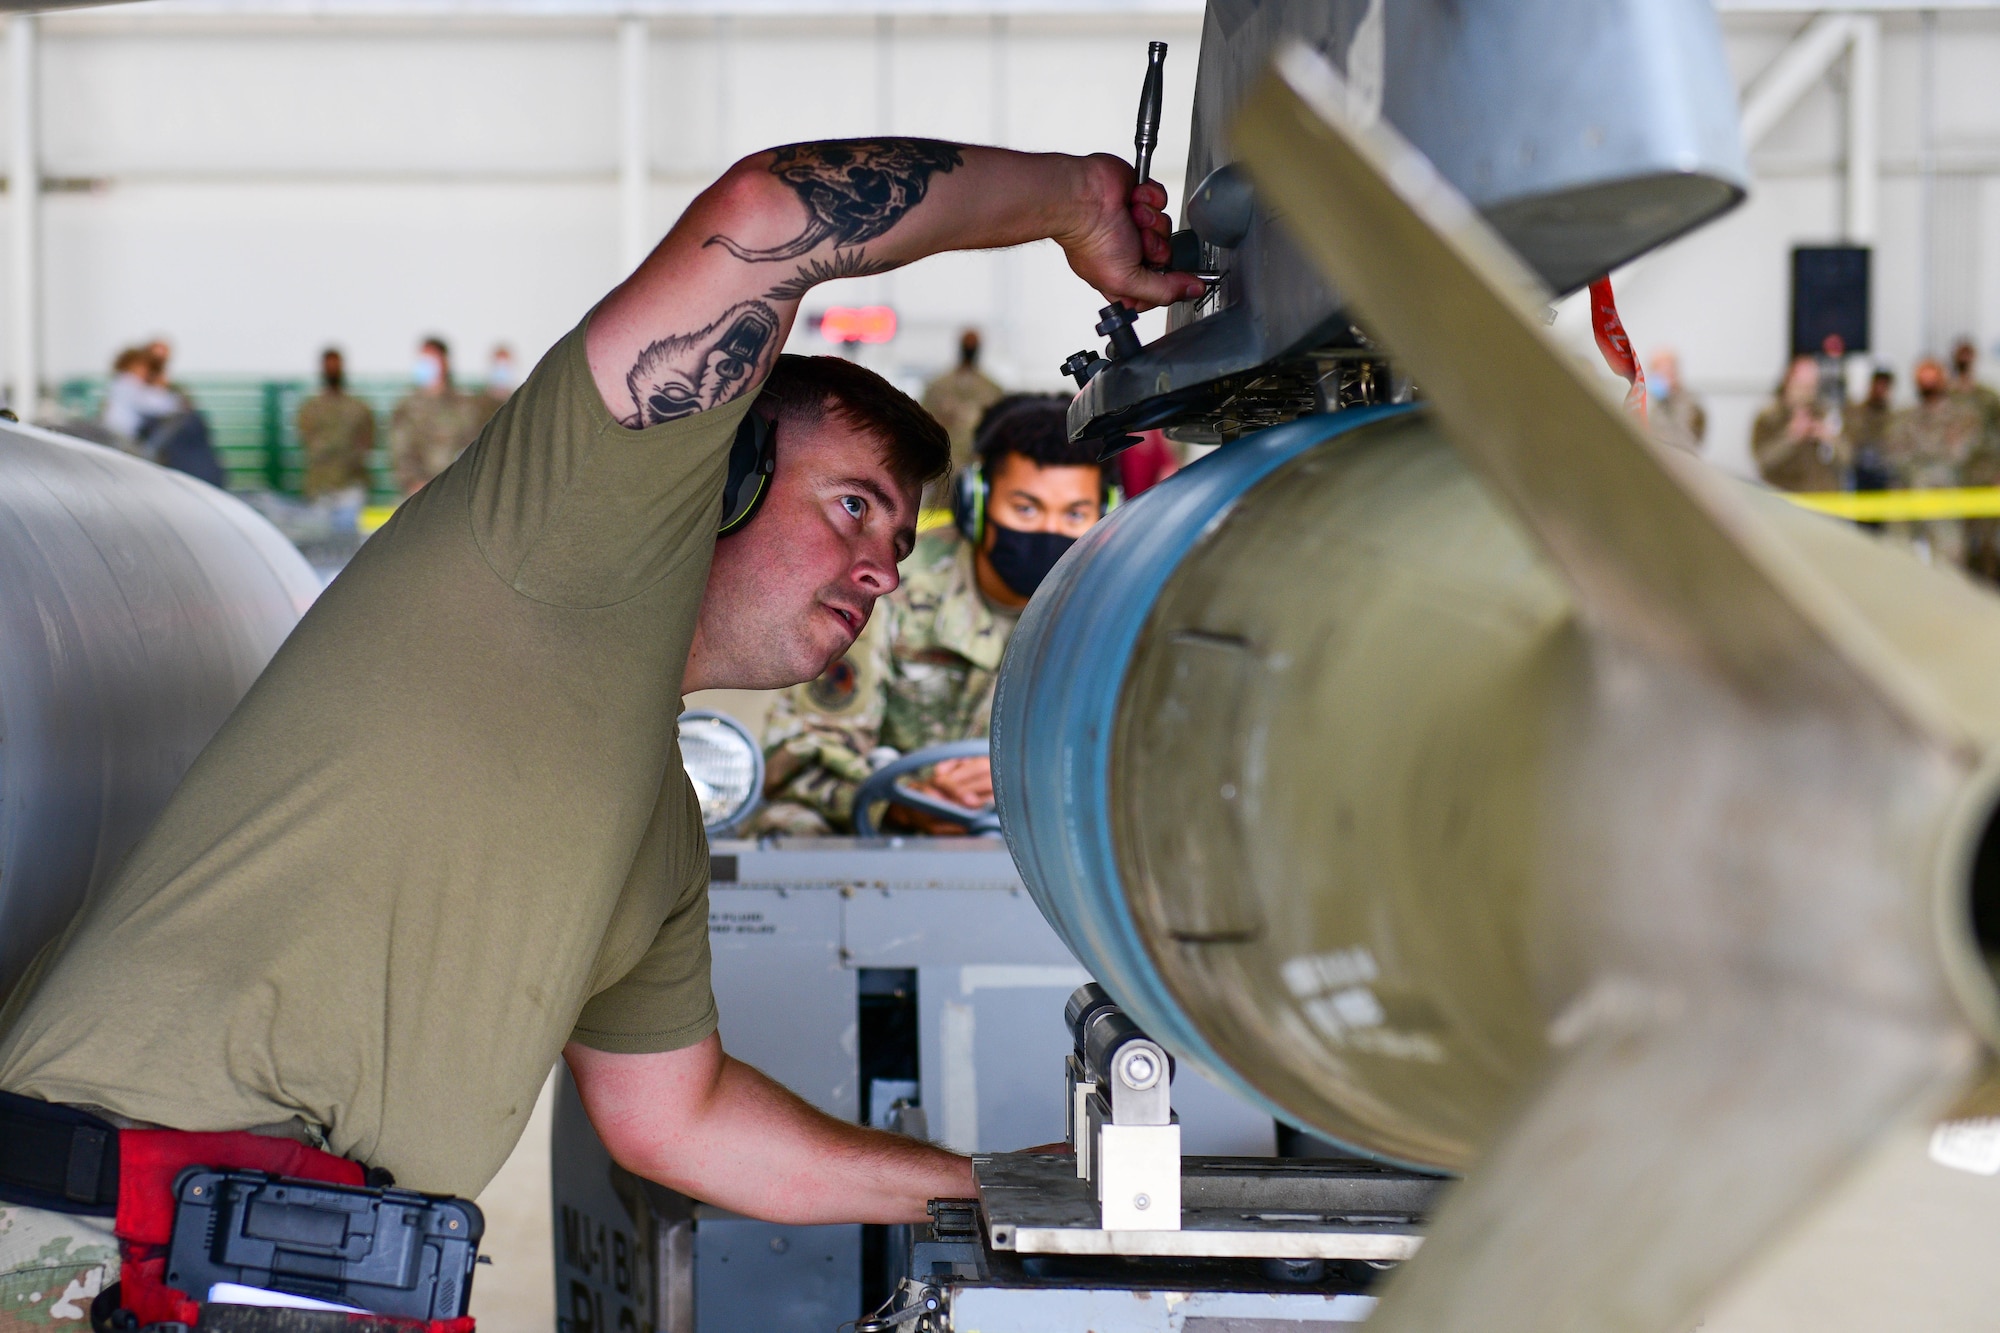 An Airman assigned to the 31st Maintenance Group loads an inert munition onto an F-16 Fighting Falcon during the 3rd quarter Rapid Aircraft Generation and Employment (RAGE) event at Aviano Air Base, Italy, Oct. 7, 2021. During RAGE, instructors evaluated the teams on technical proficiency, safety procedures and overall time. (U.S. Air Force photo by Senior Airman Brooke Moeder)